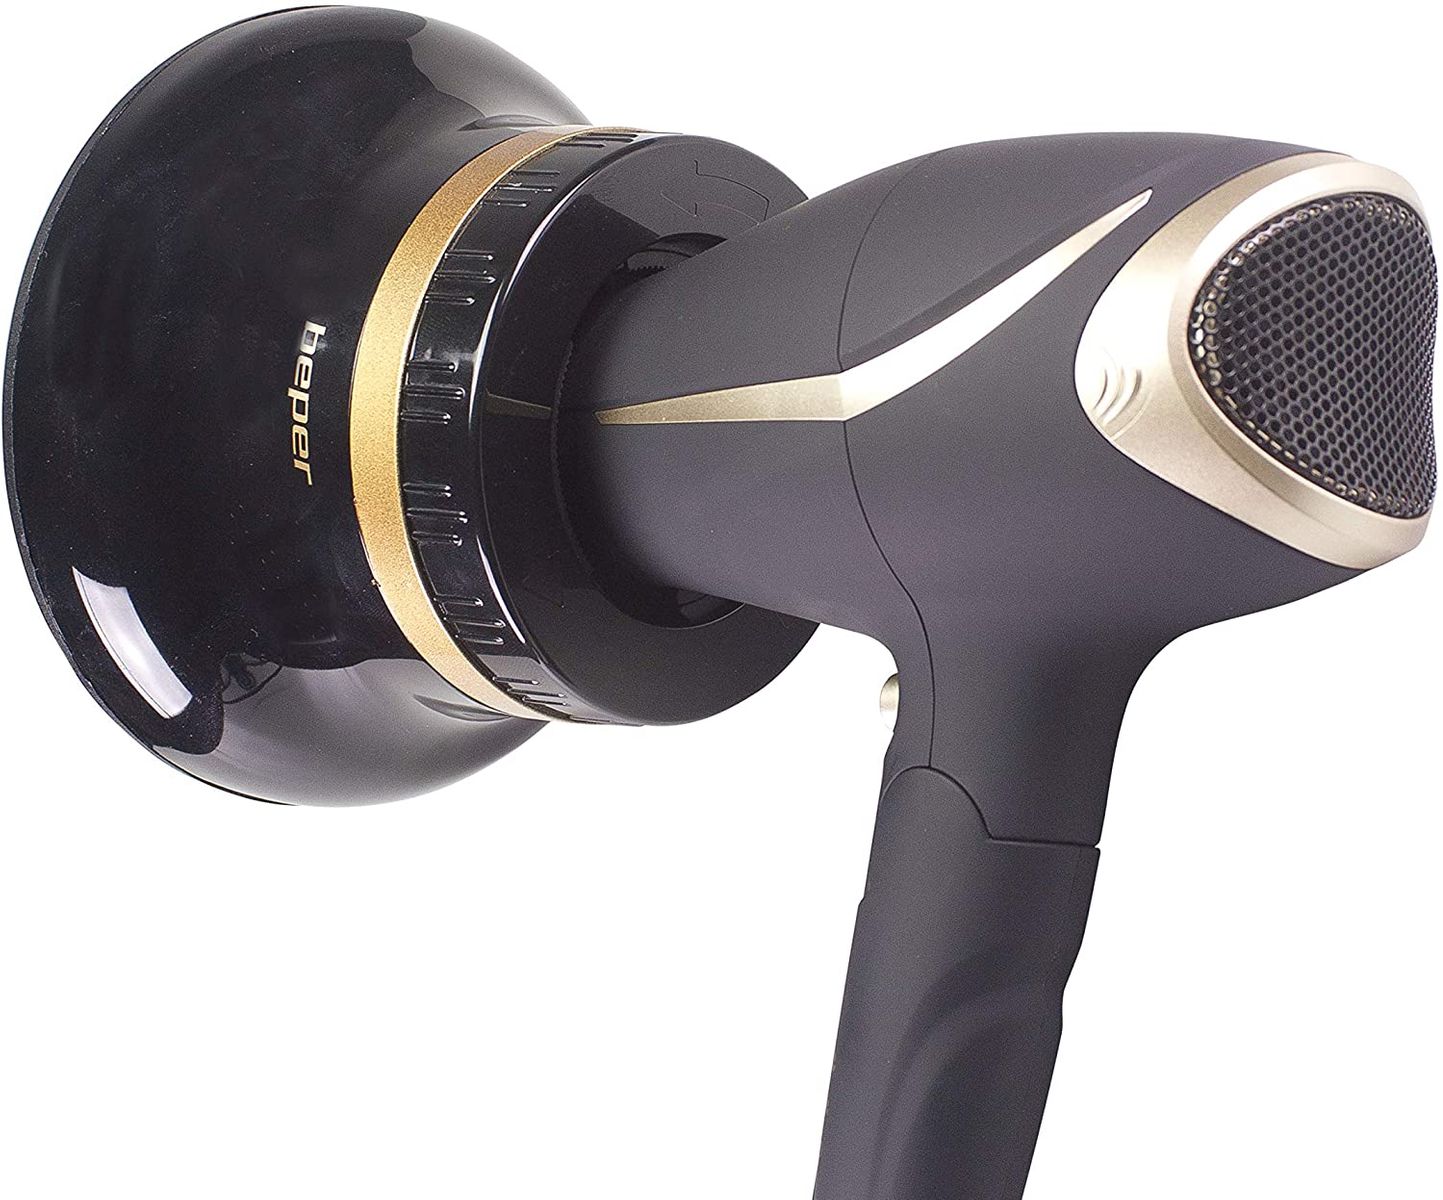 BEPER C301ABE001 Universal diffuser for curly and curly hair, without curly hair, suitable for all hair dryers, black.